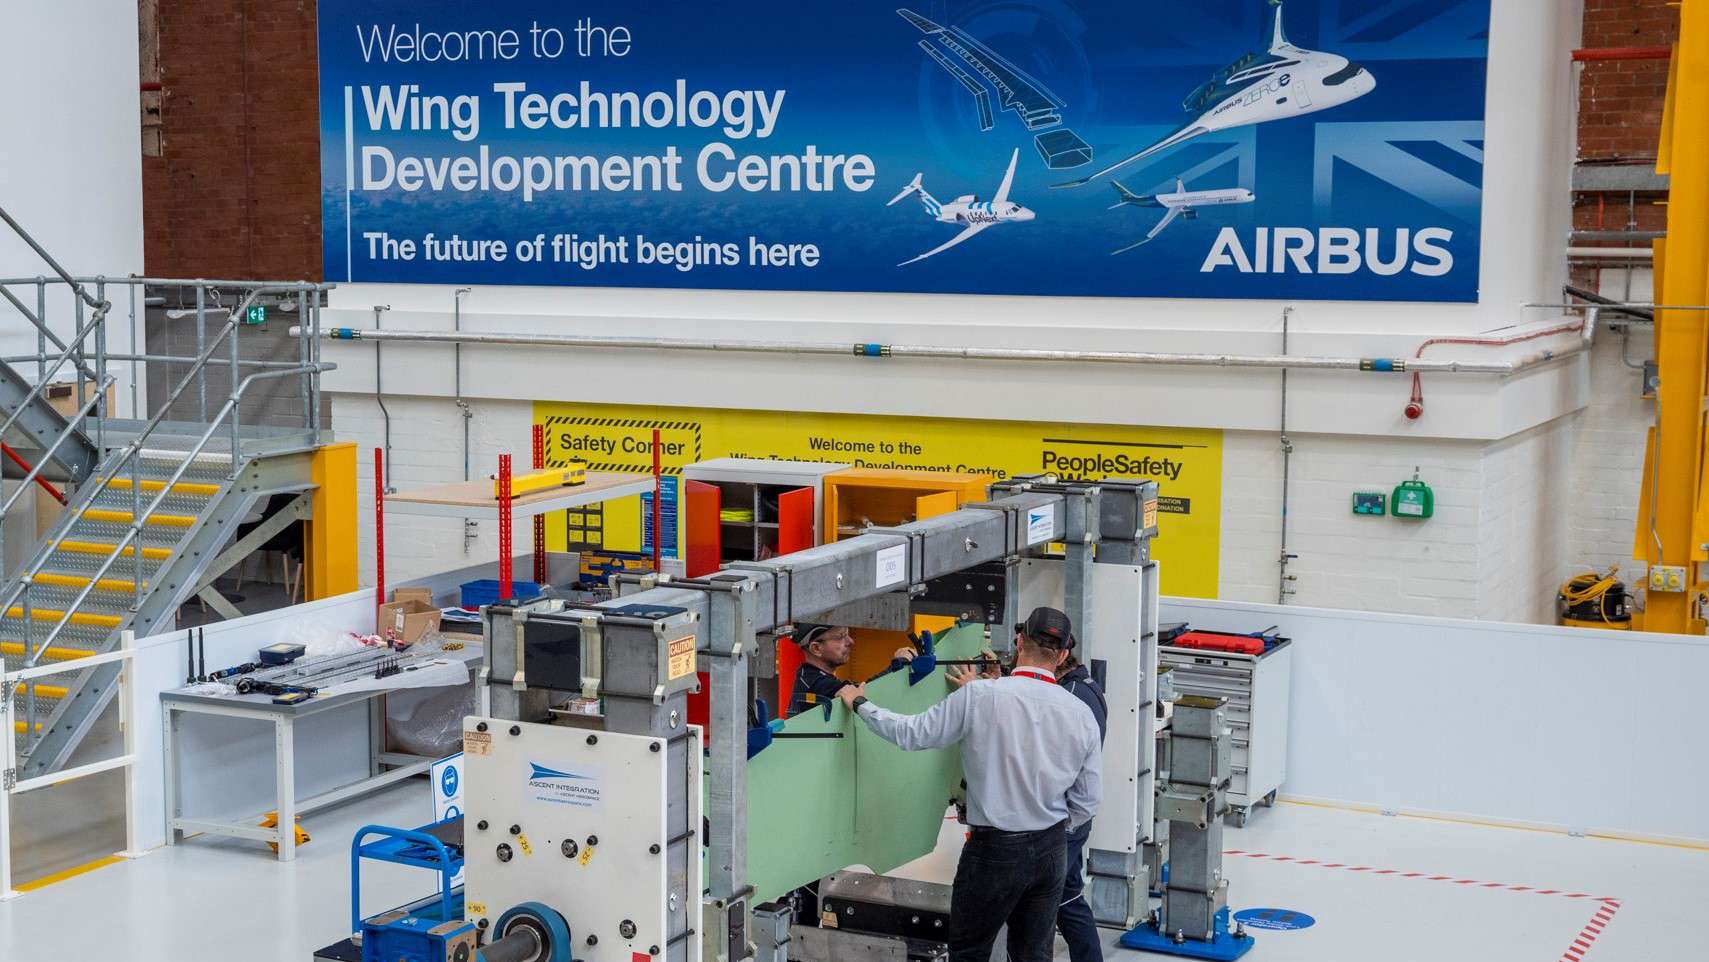 Airbus Launches Technology Hub For New Wing Development